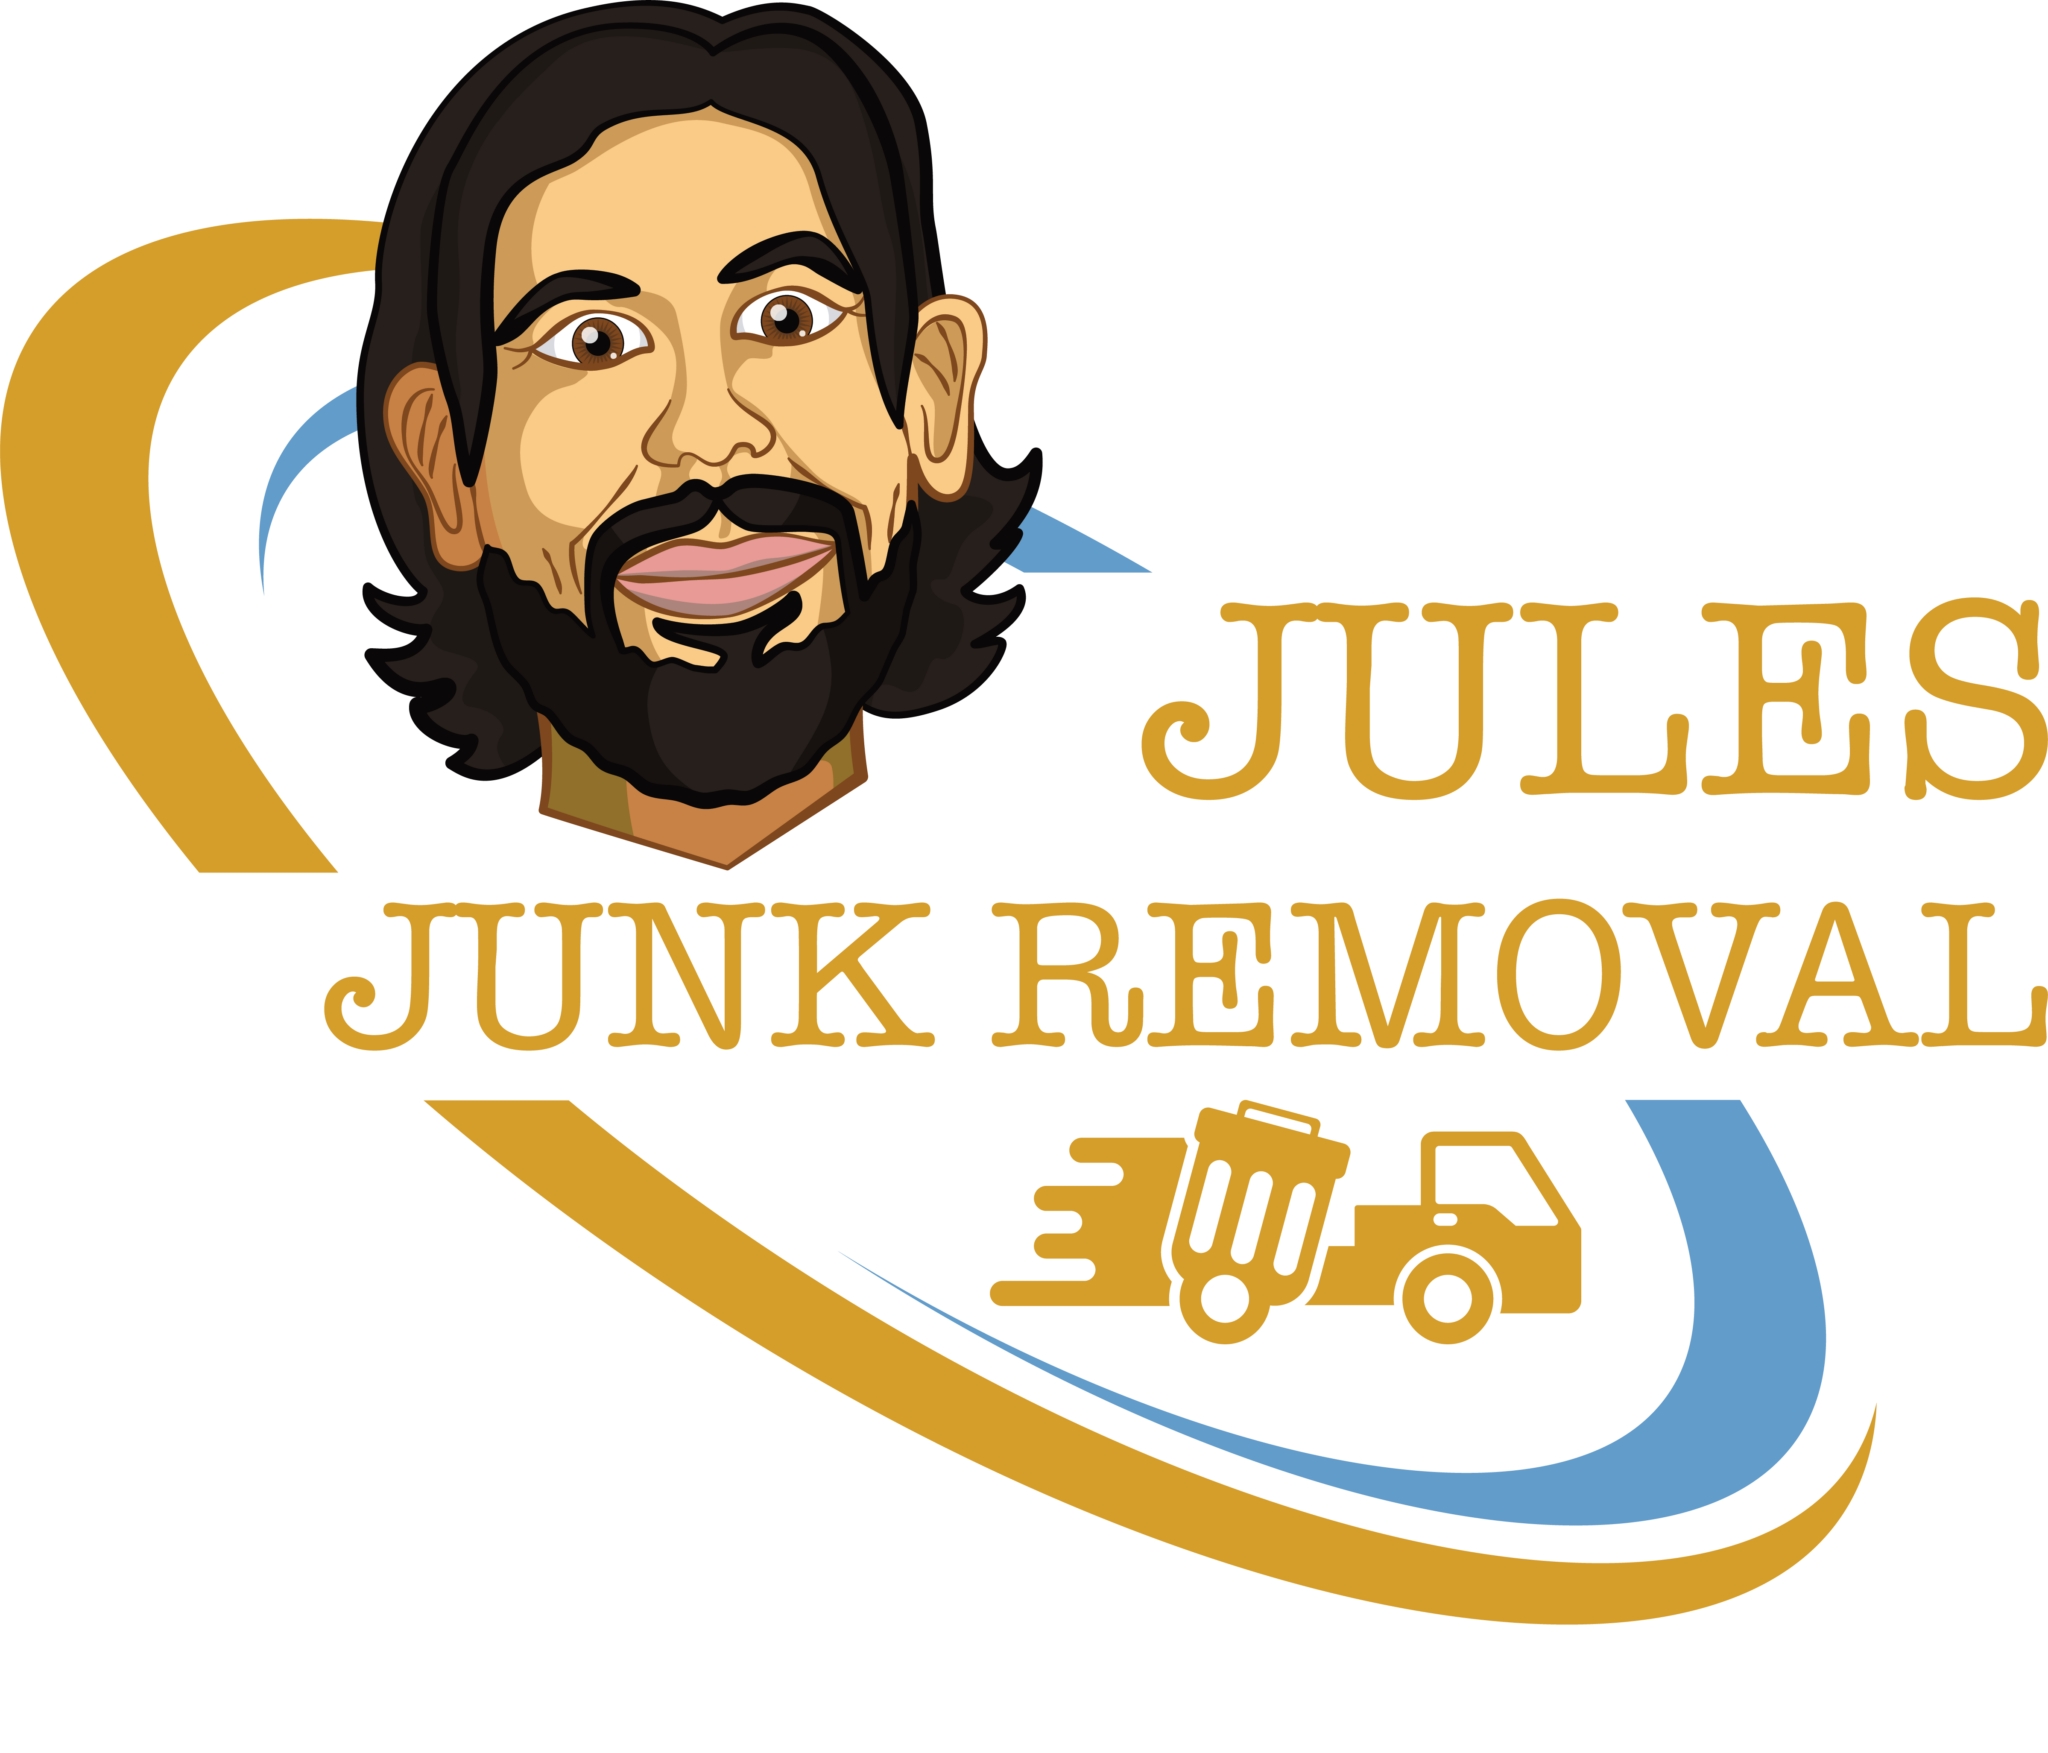 Jules Junk Removal